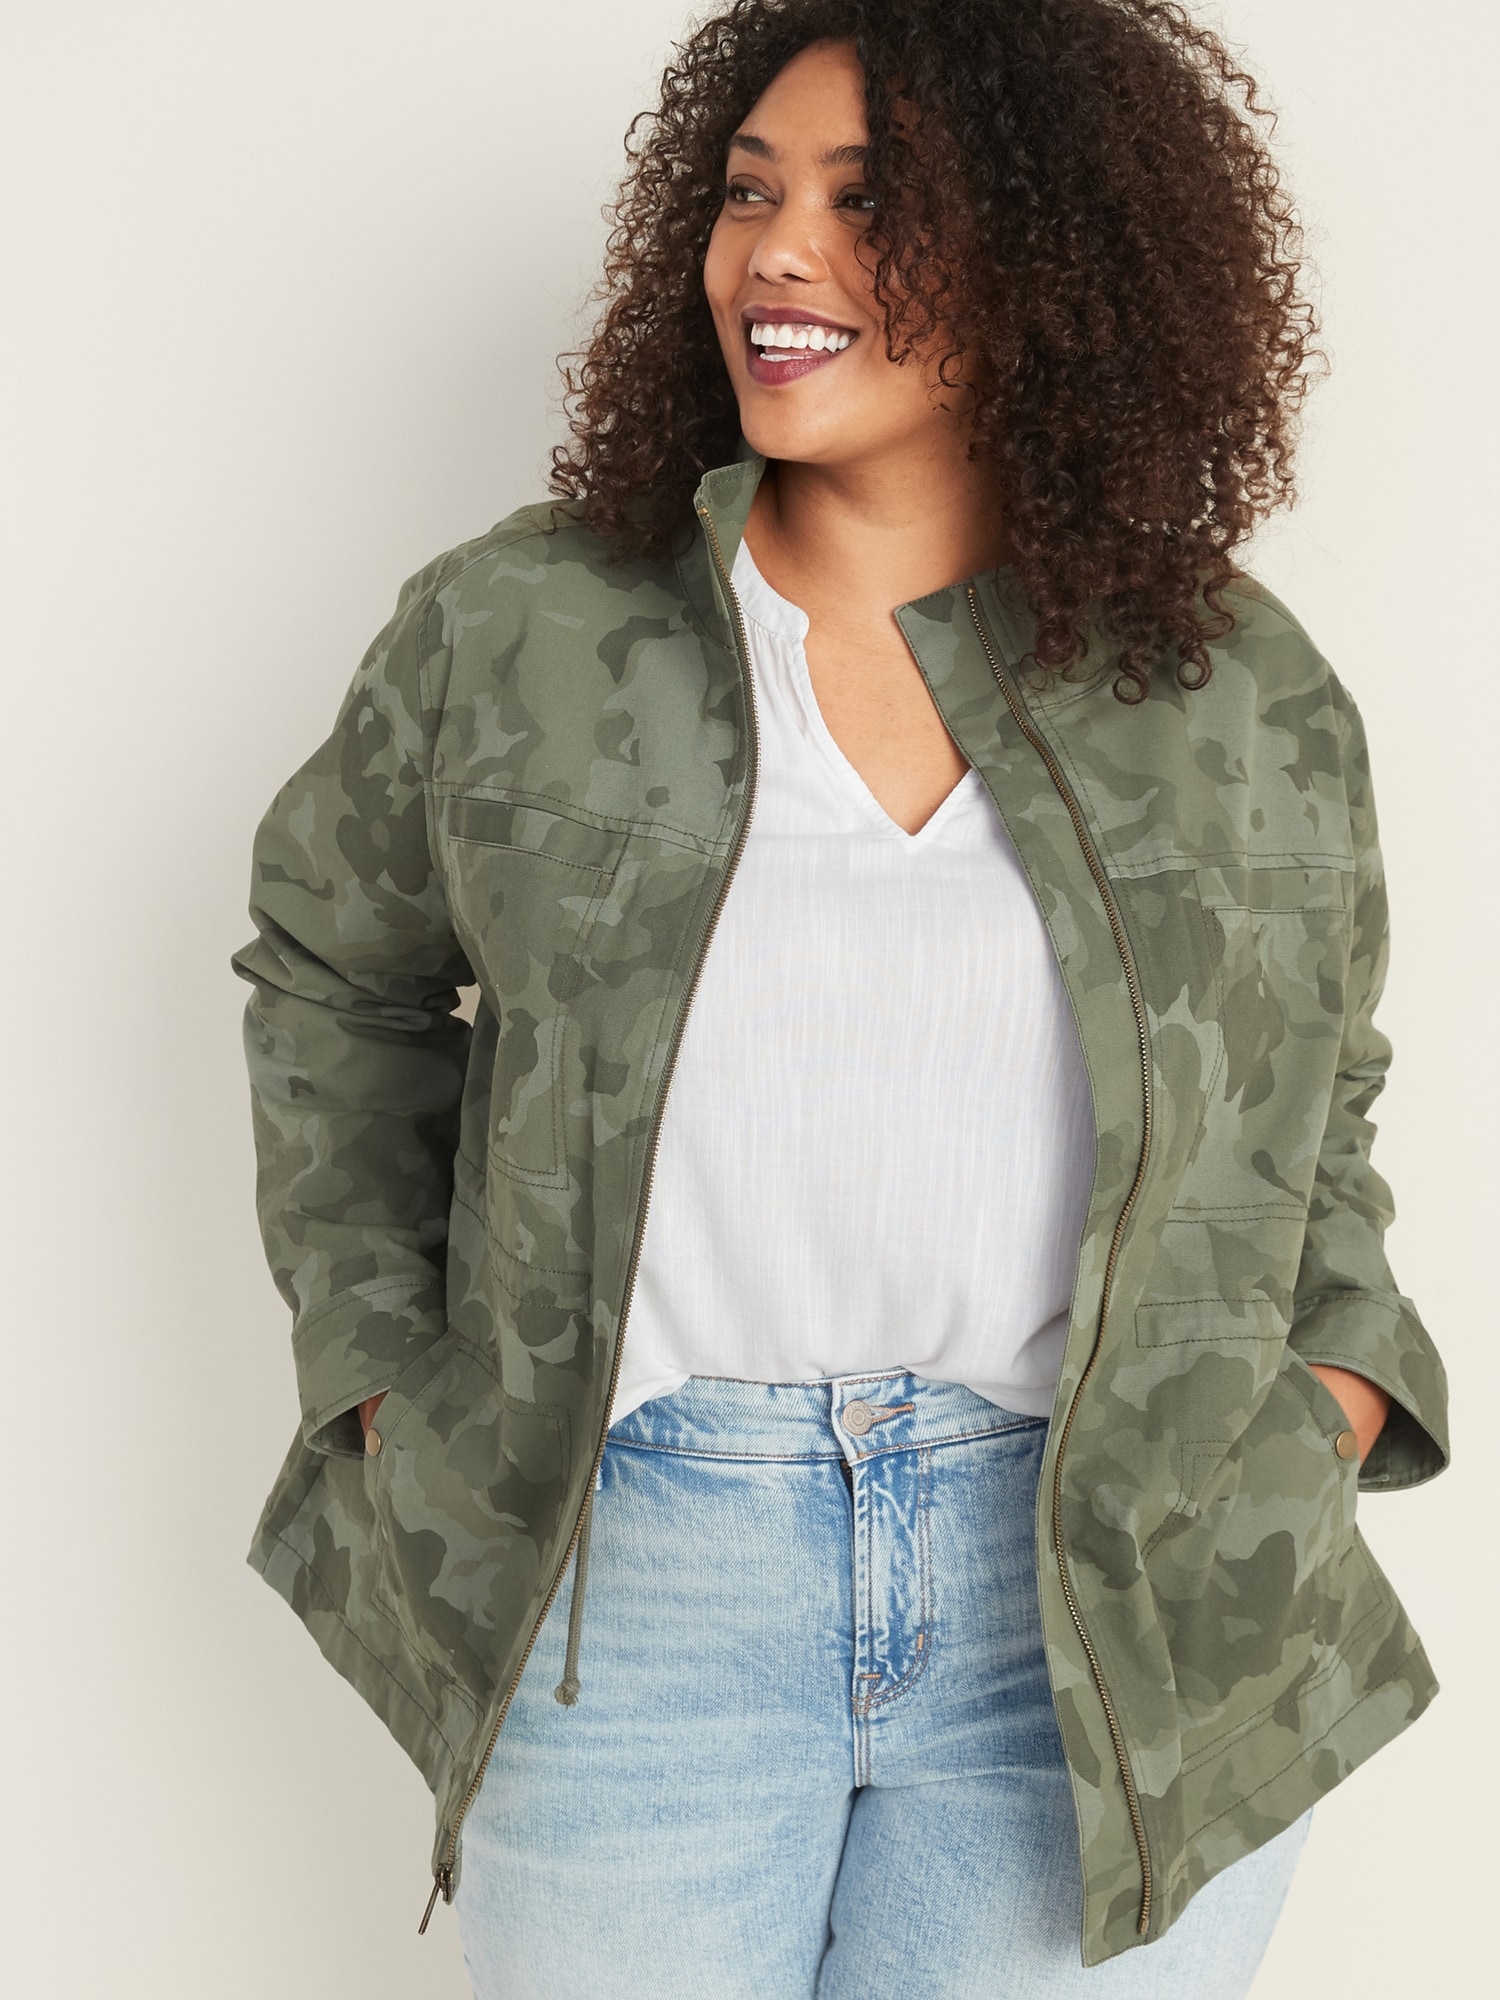 old navy plus size jackets